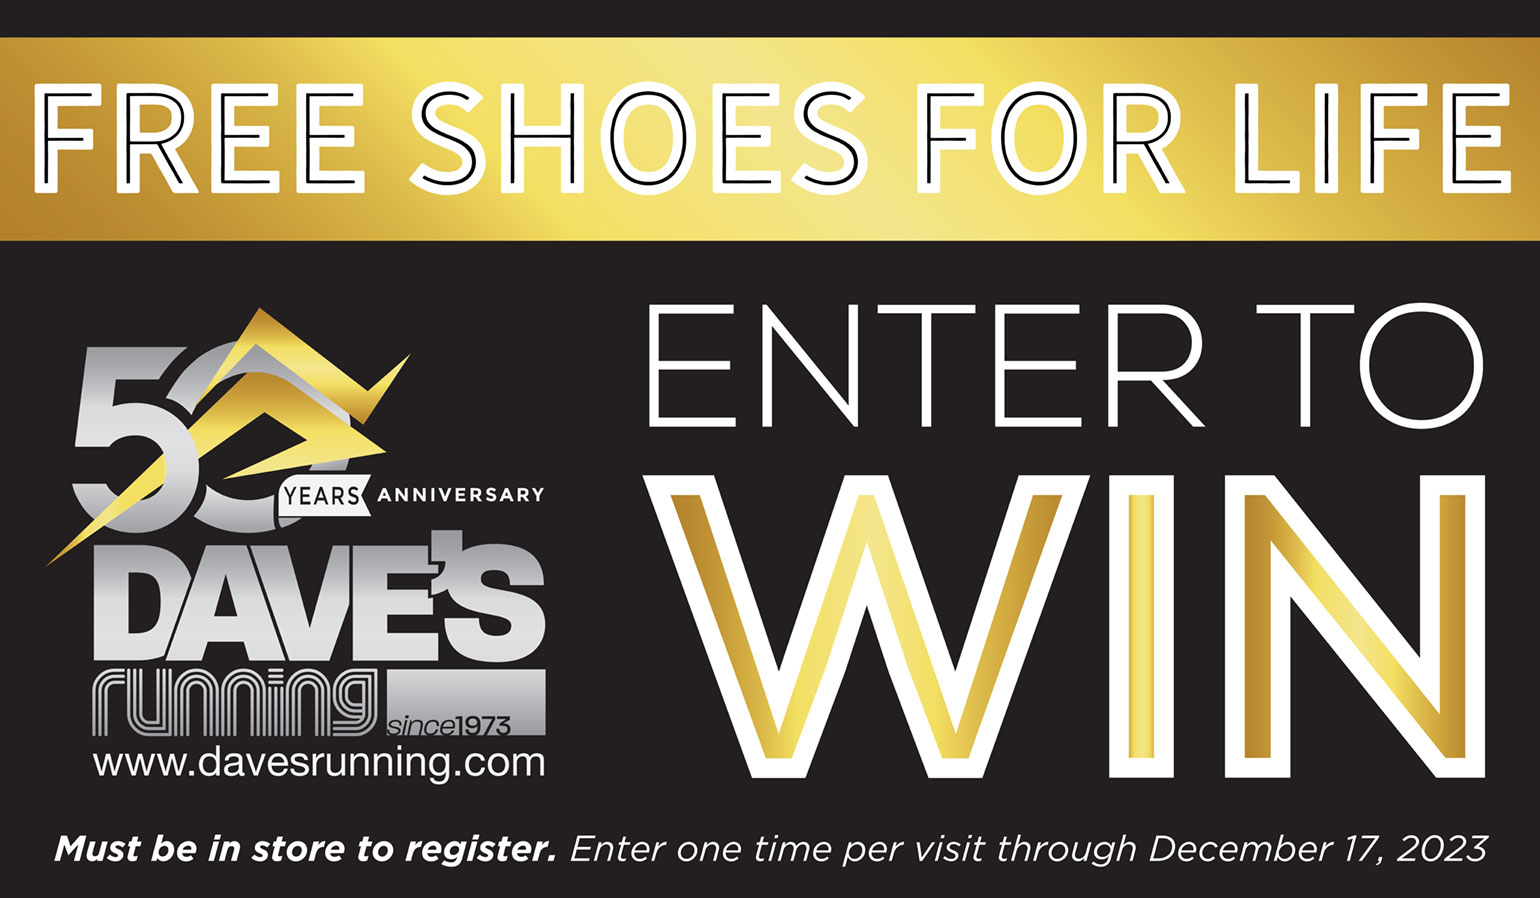 Win free shoes for life from Dave's Running Shop